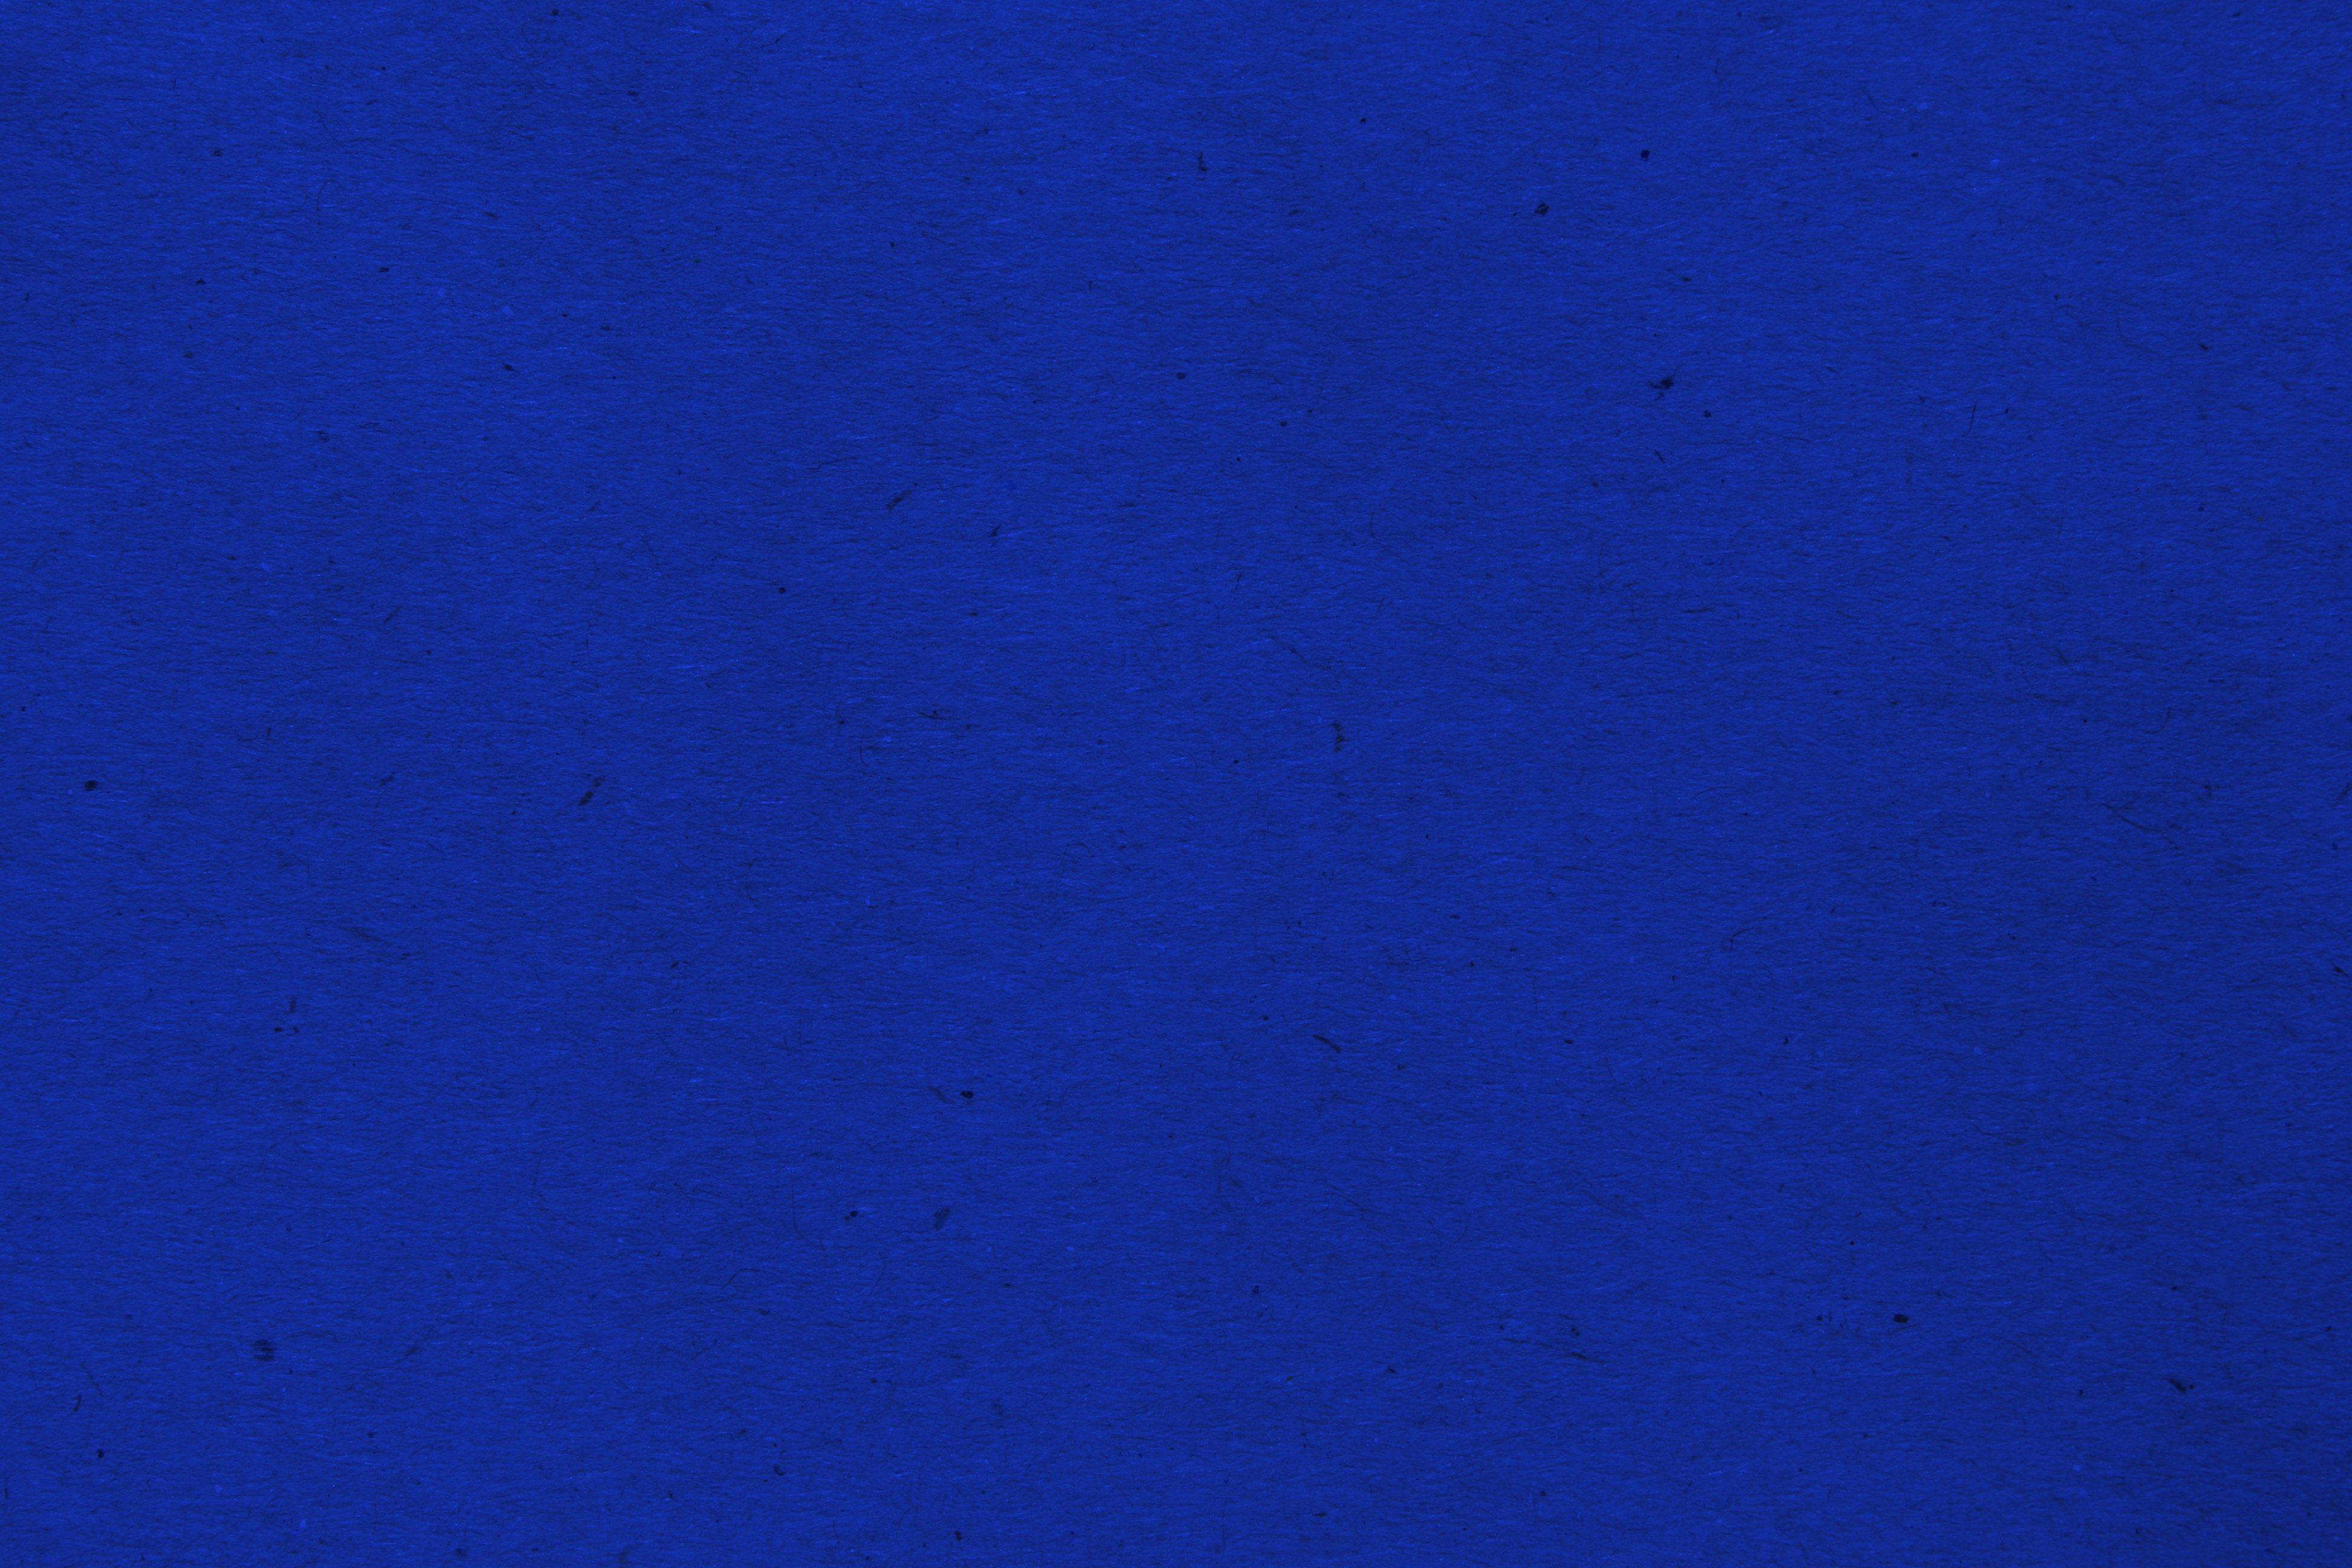 Deep Blue Paper Texture with Flecks Picture | Free Photograph ...